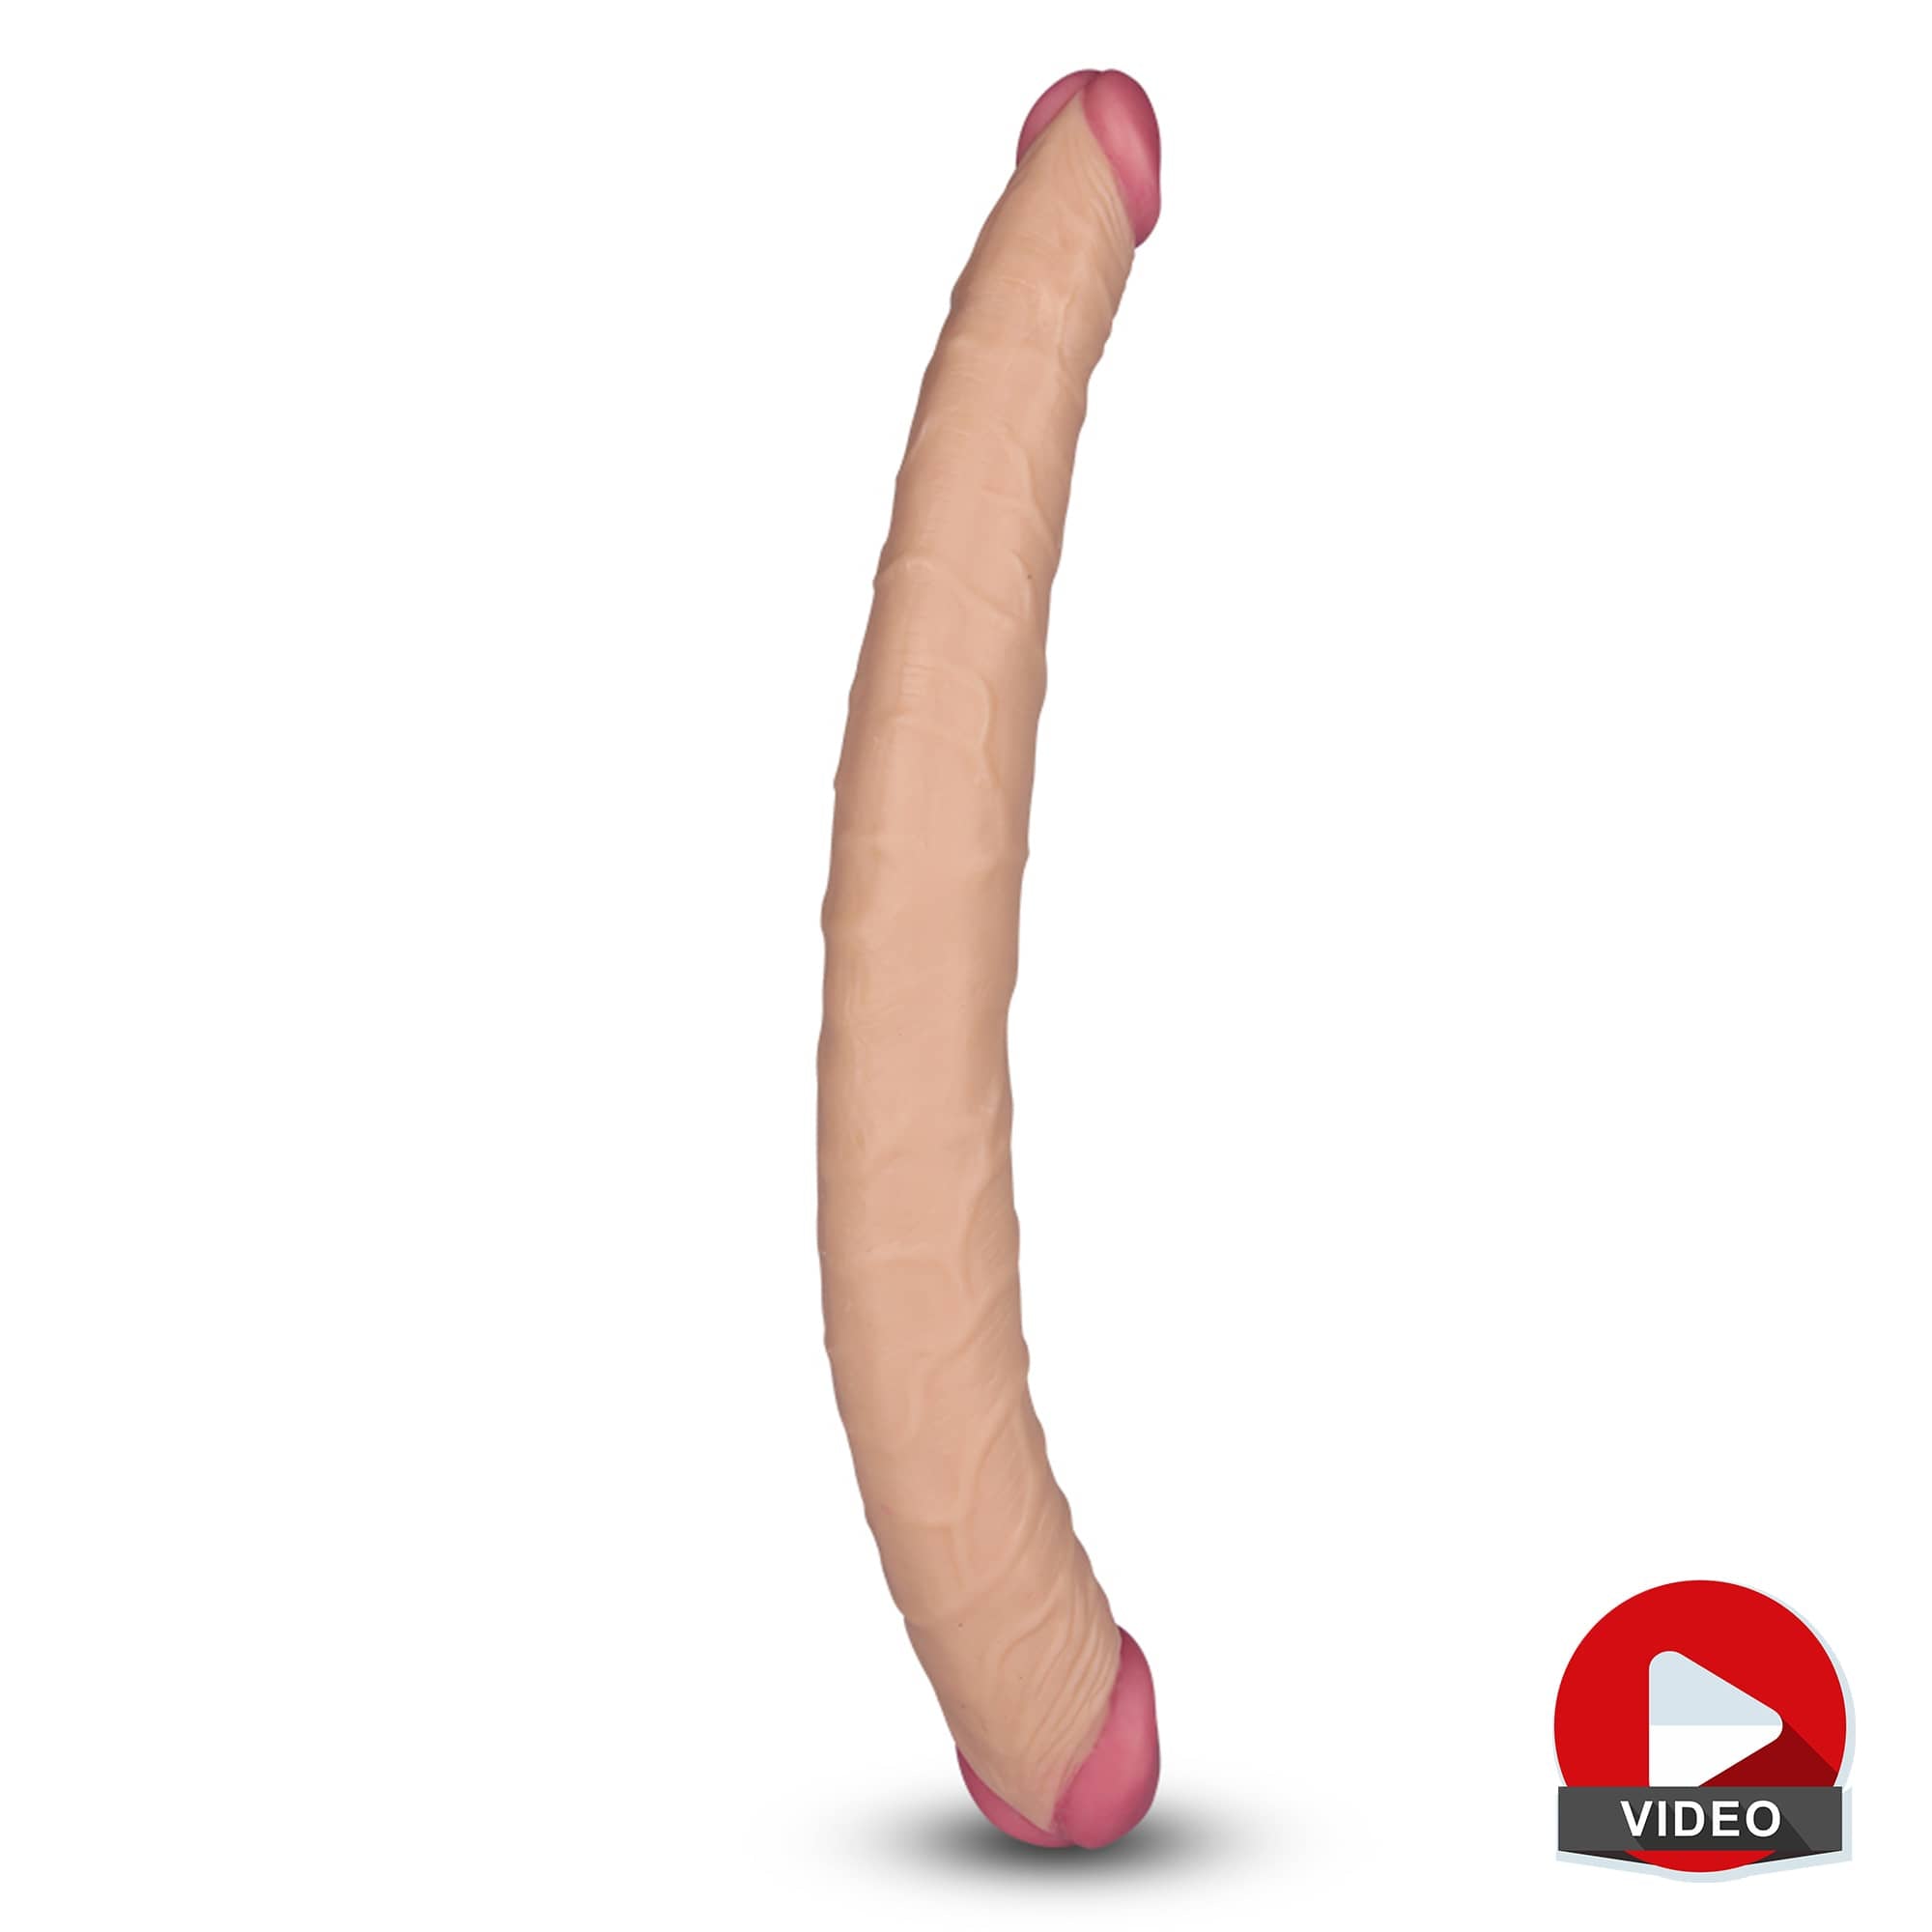 The 14 inches double ended realistic dildo is upright with a video playback logo